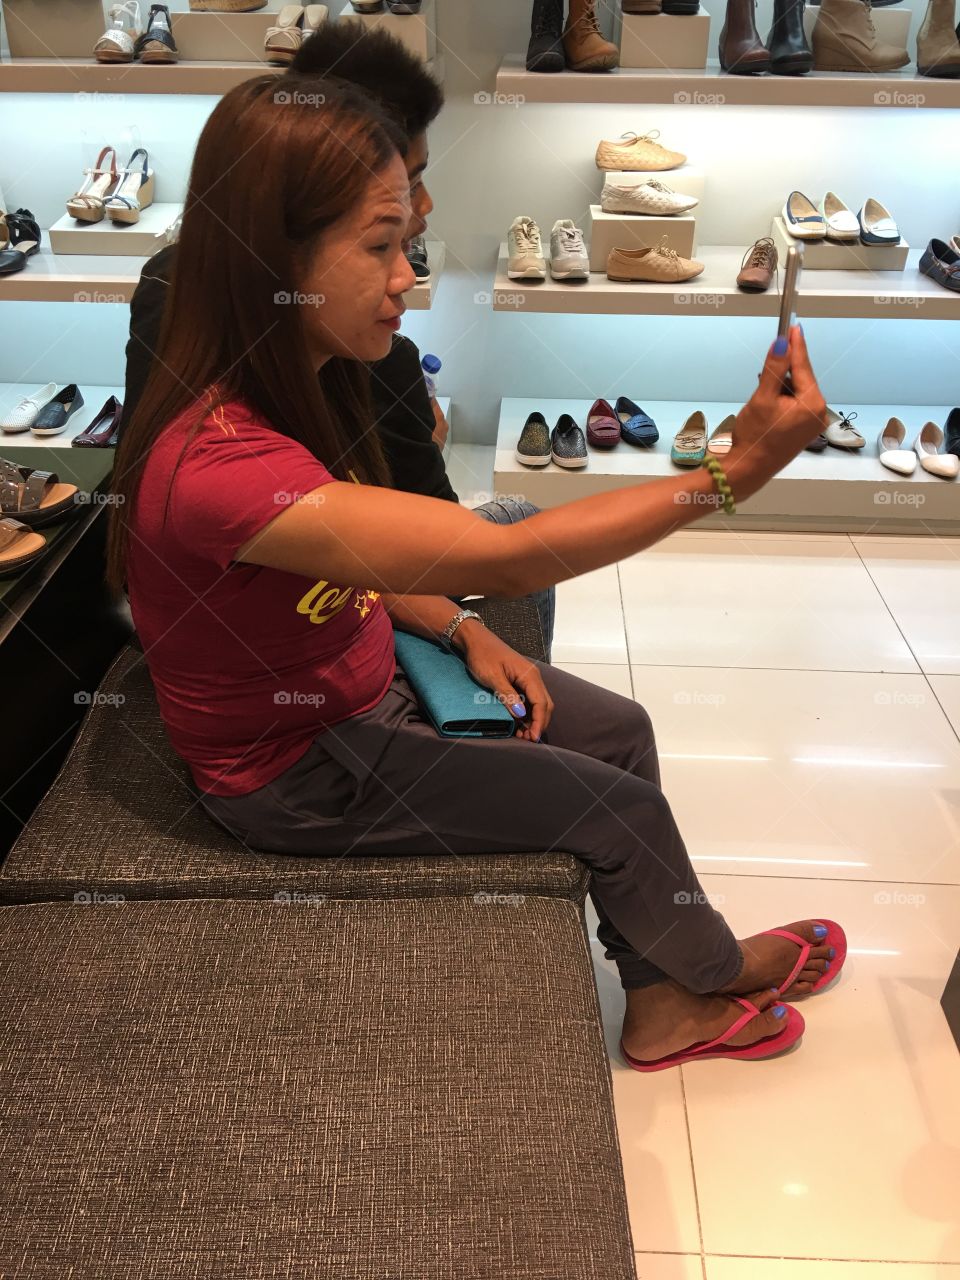 Using phone at the mall